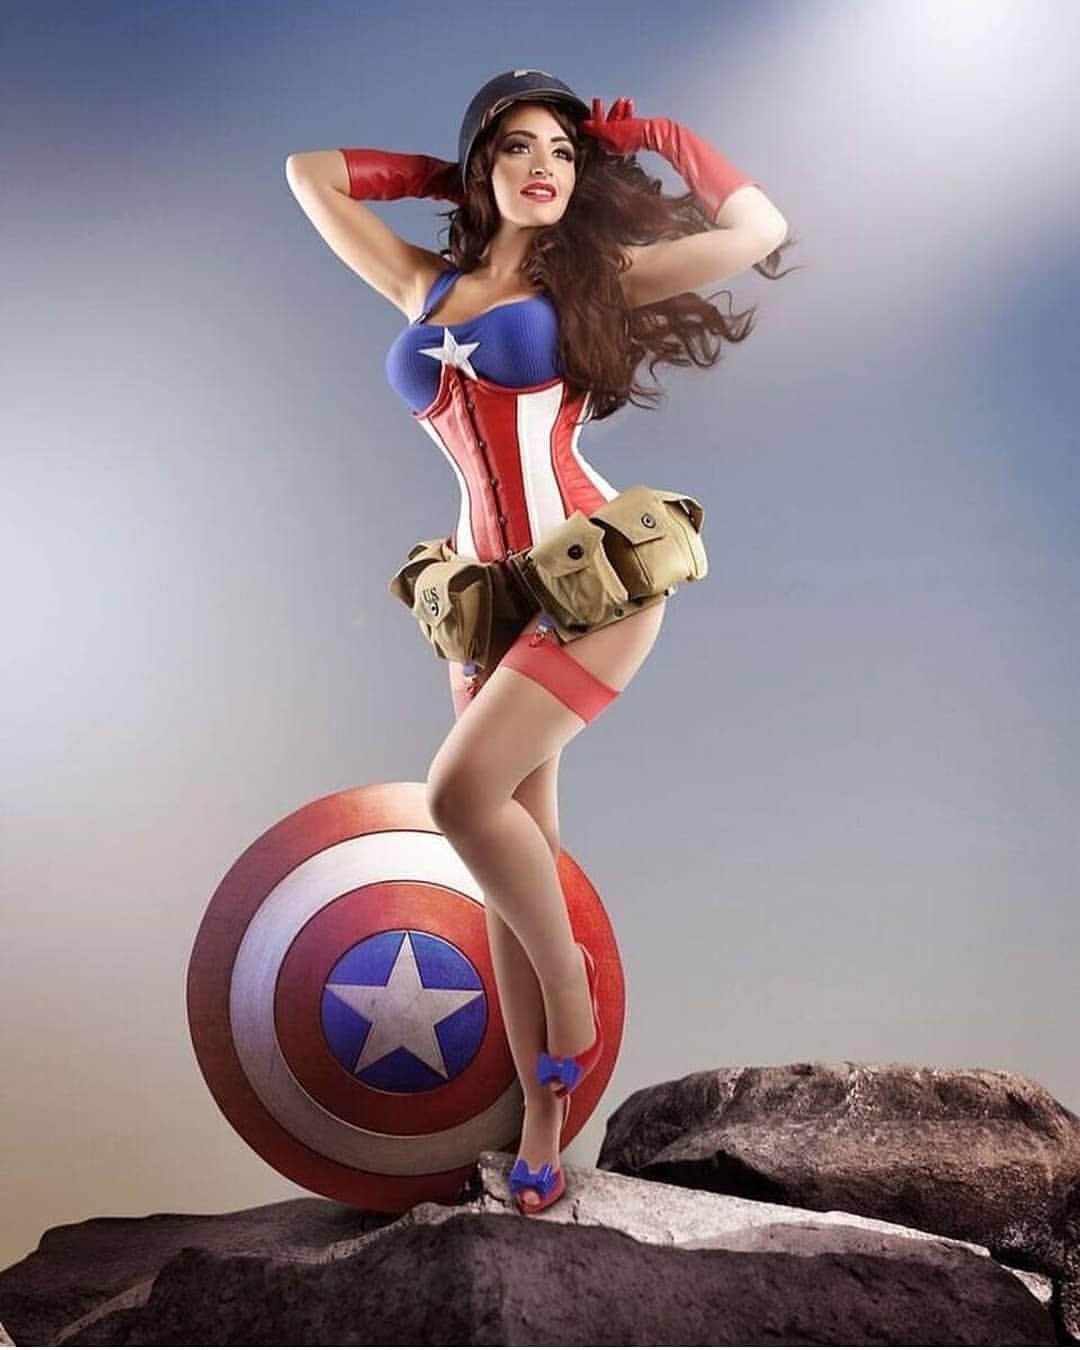 Photo by pupscale87 with the username @pupscale87,  November 25, 2018 at 10:55 AM and the text says 'theworldofcomiccon:

Beautiful Captain America pinup cosplay by @artyfakes
✔her out &amp; show some❤
.
-Photo by @dollhousephotographyuk
.
.
.
#captainamerica #pinup #cosplay #marvel #pinupgirl #marvelcomics #marveluniverse #steverogers #cosplayer..'